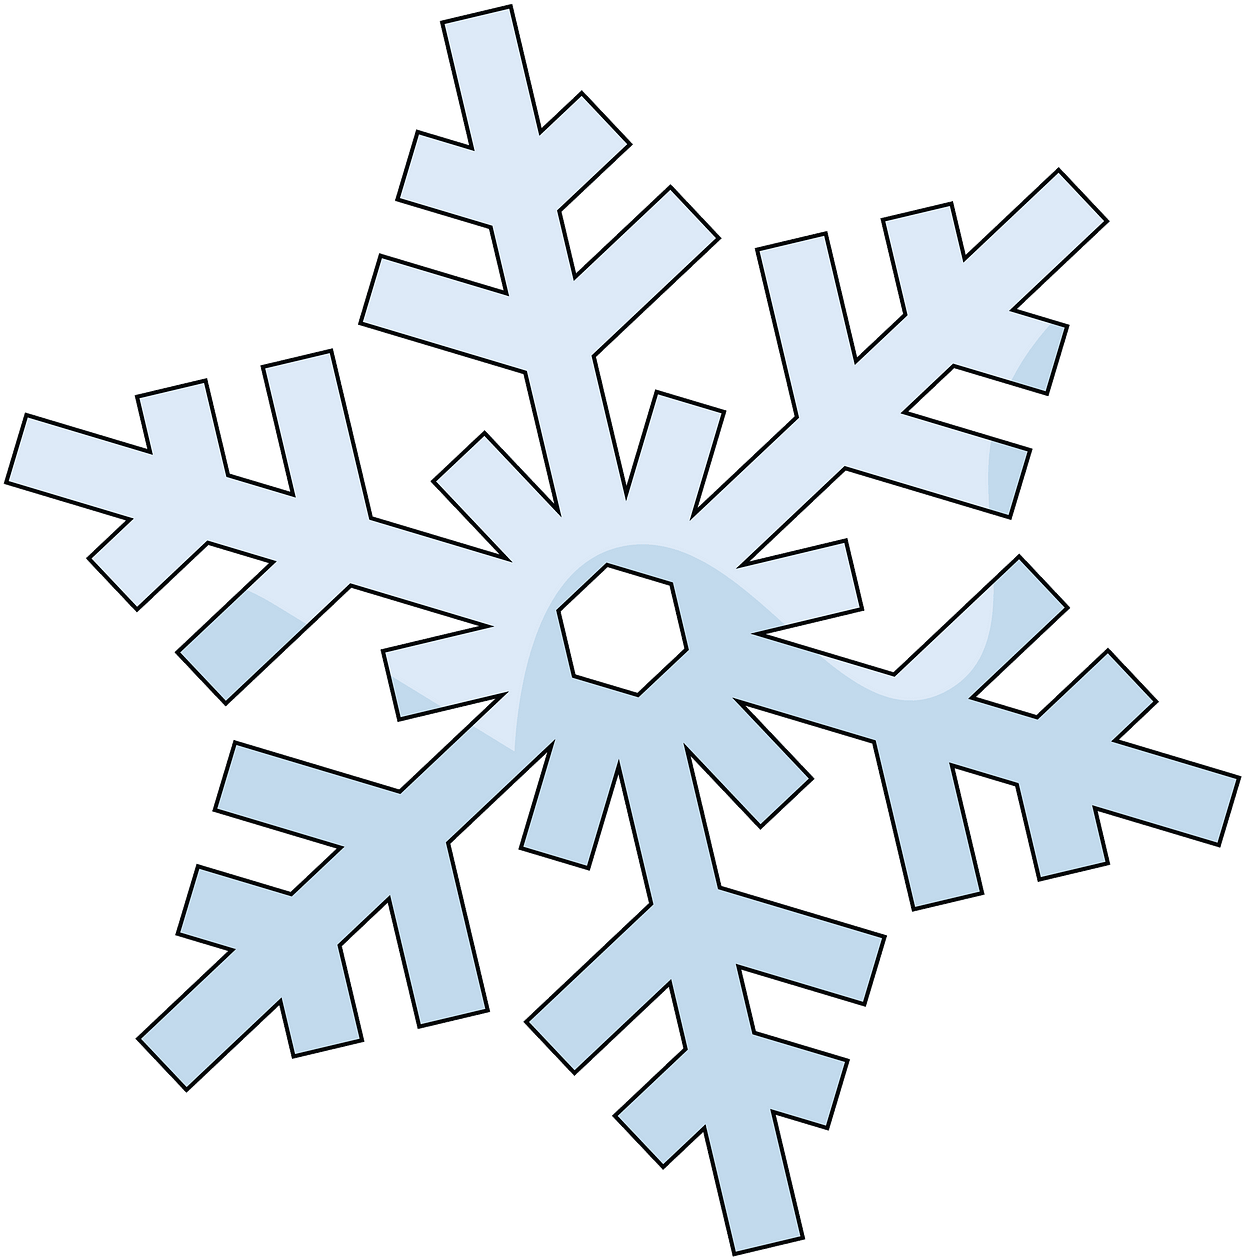 Stylized Snowflake Graphic PNG